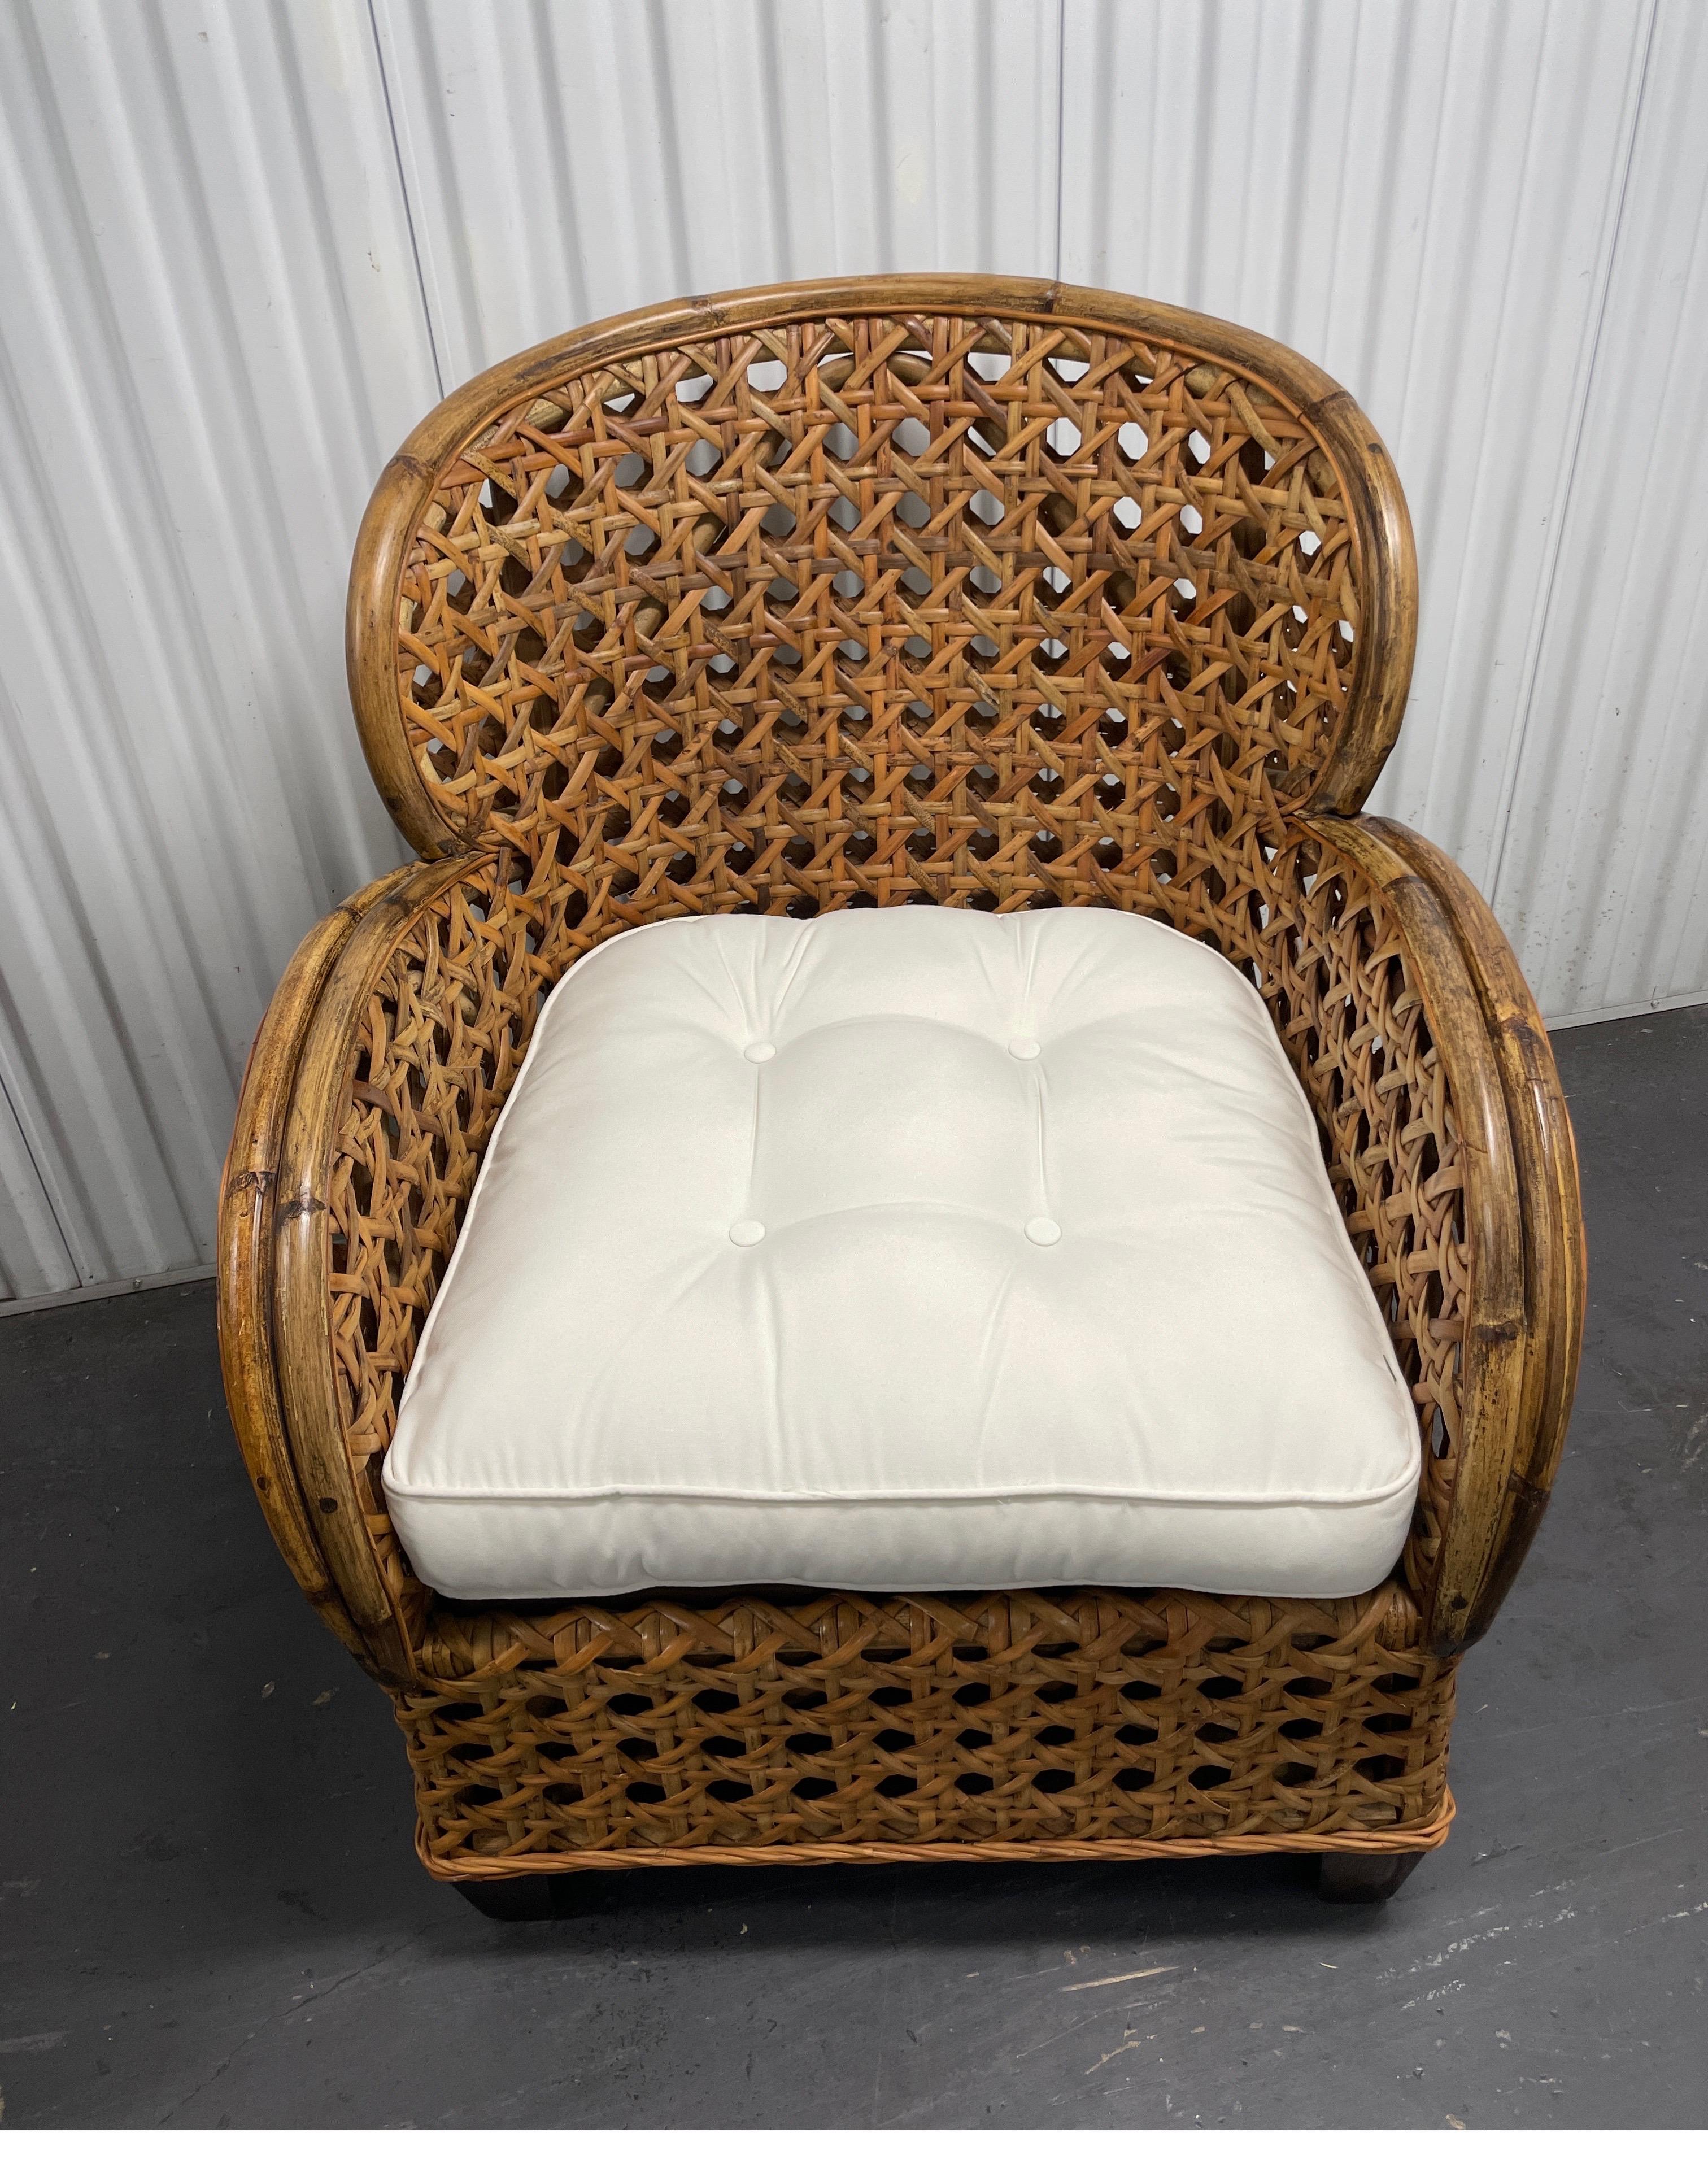 Vintage pair of French inspired rattan and cane arm / club chairs with white seat cushion in an art deco style.